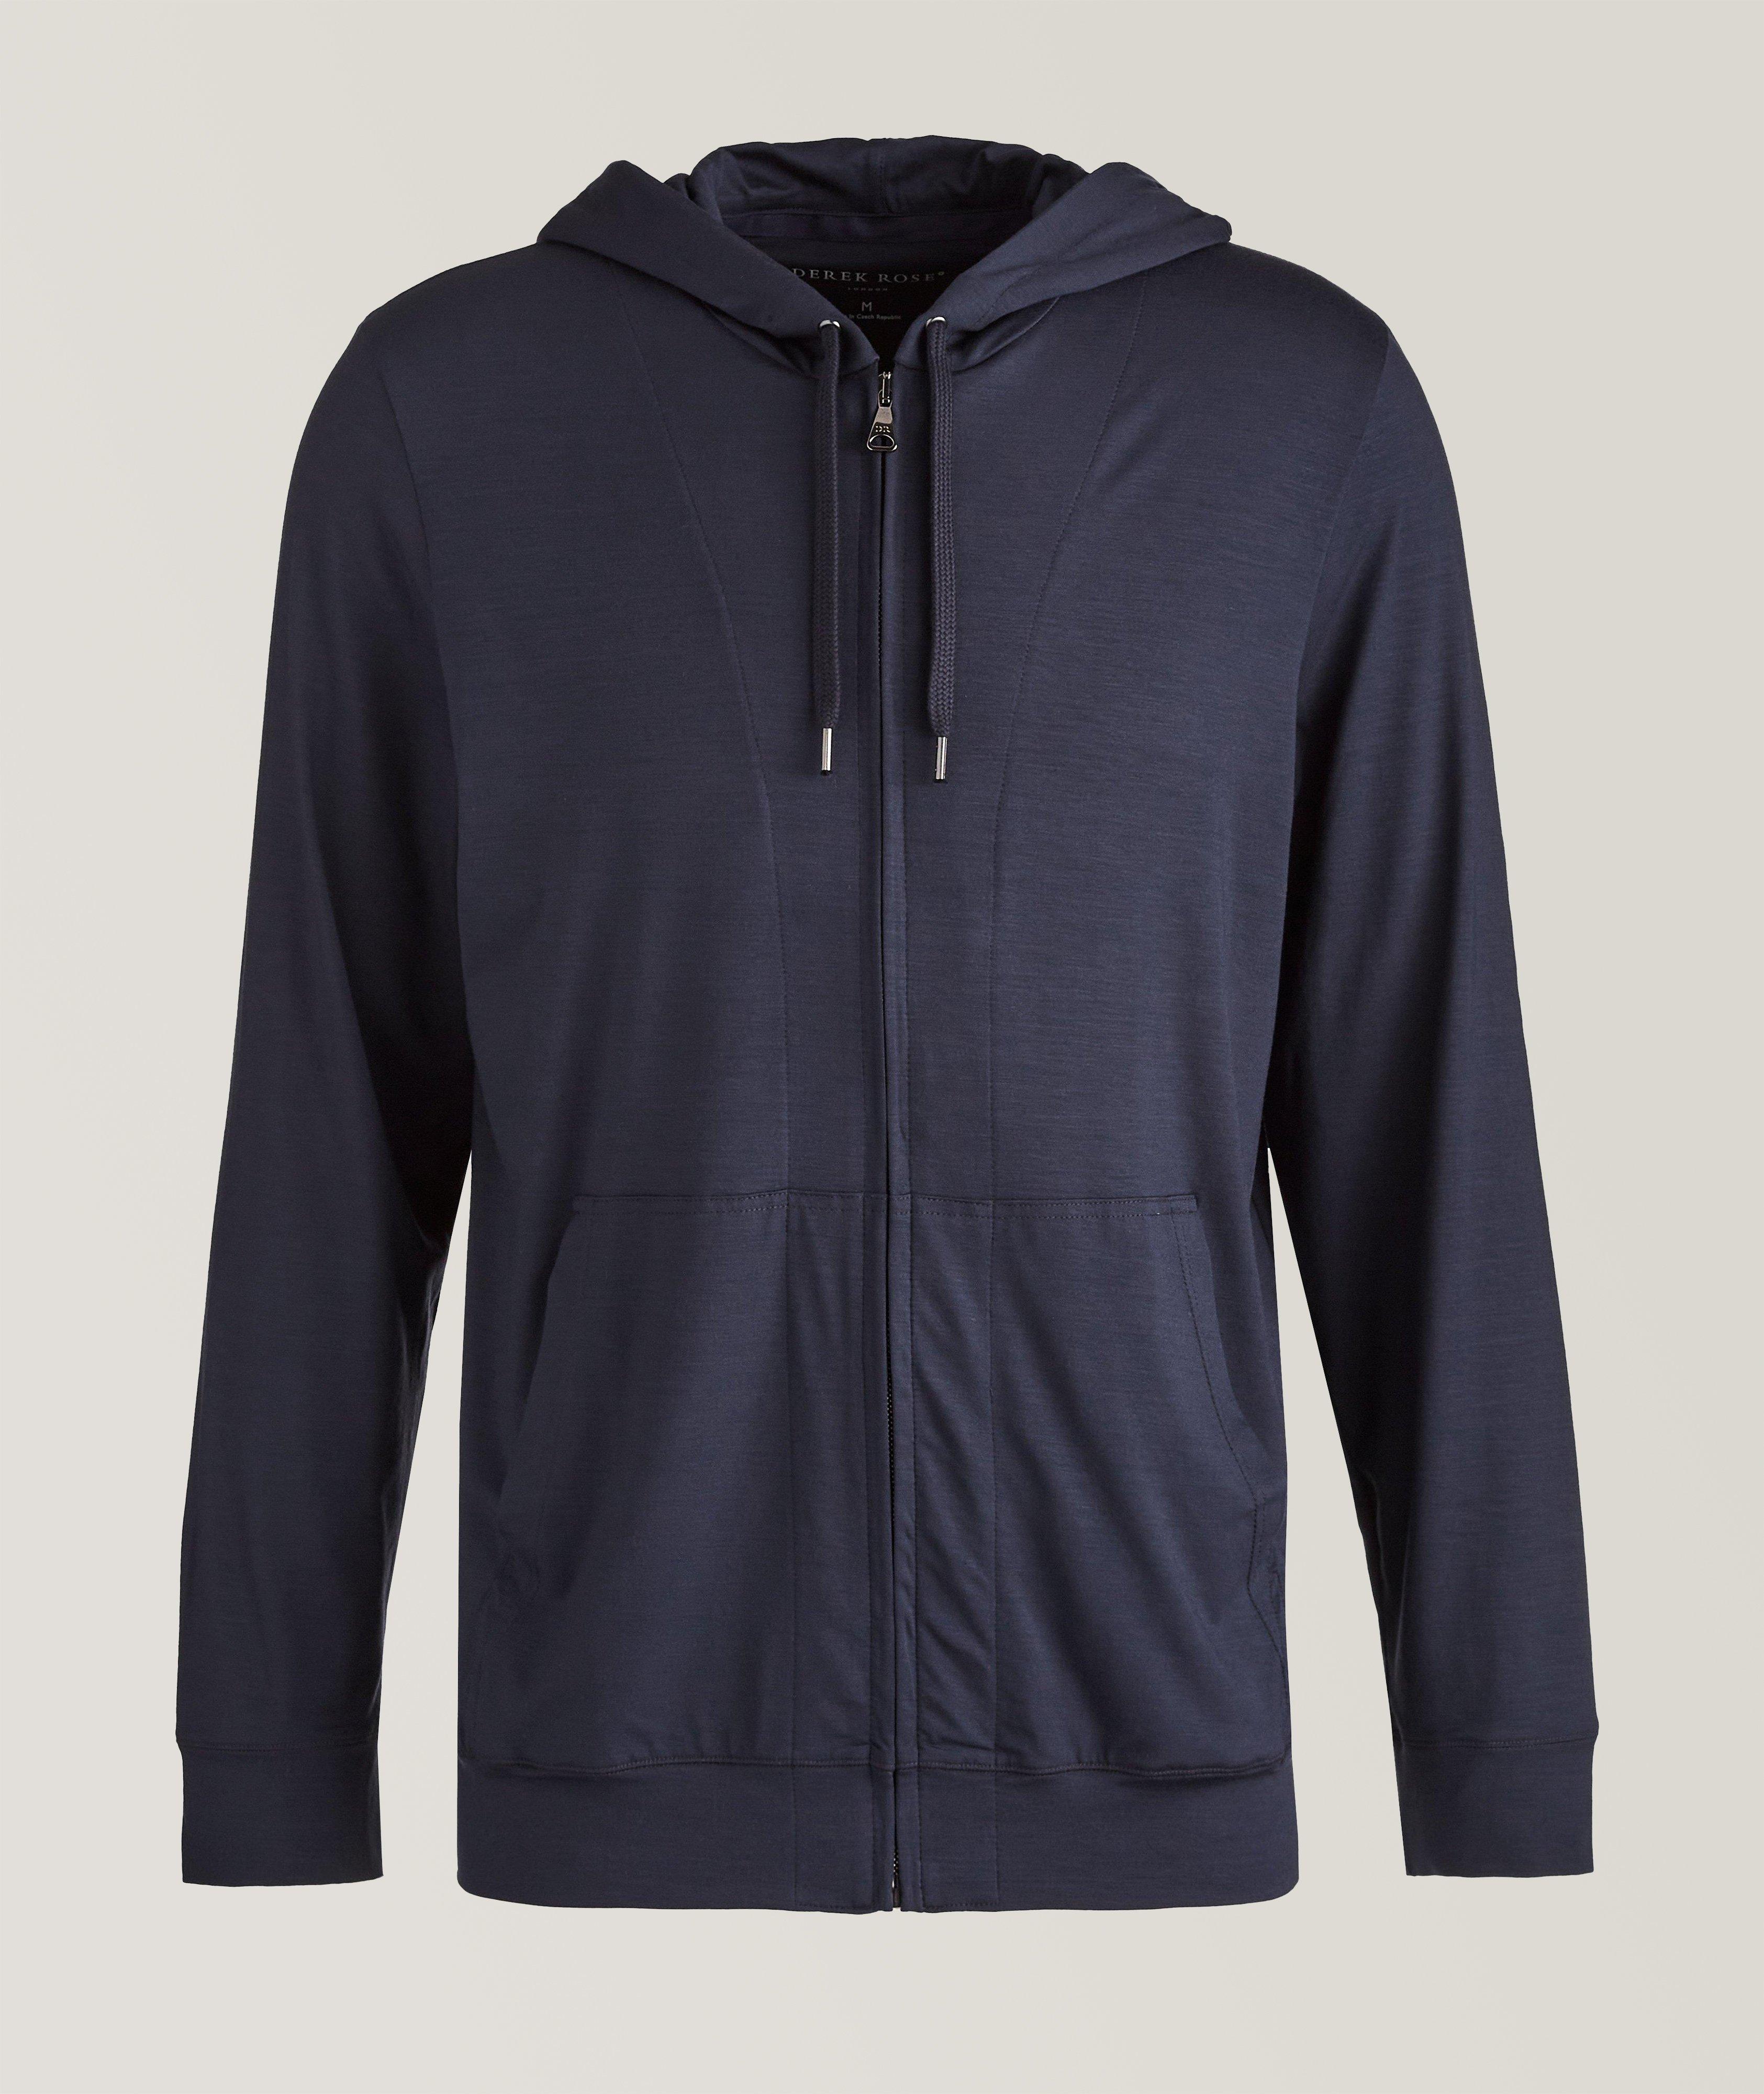 Basel Stretch-Micromodal Hooded Sweater image 0